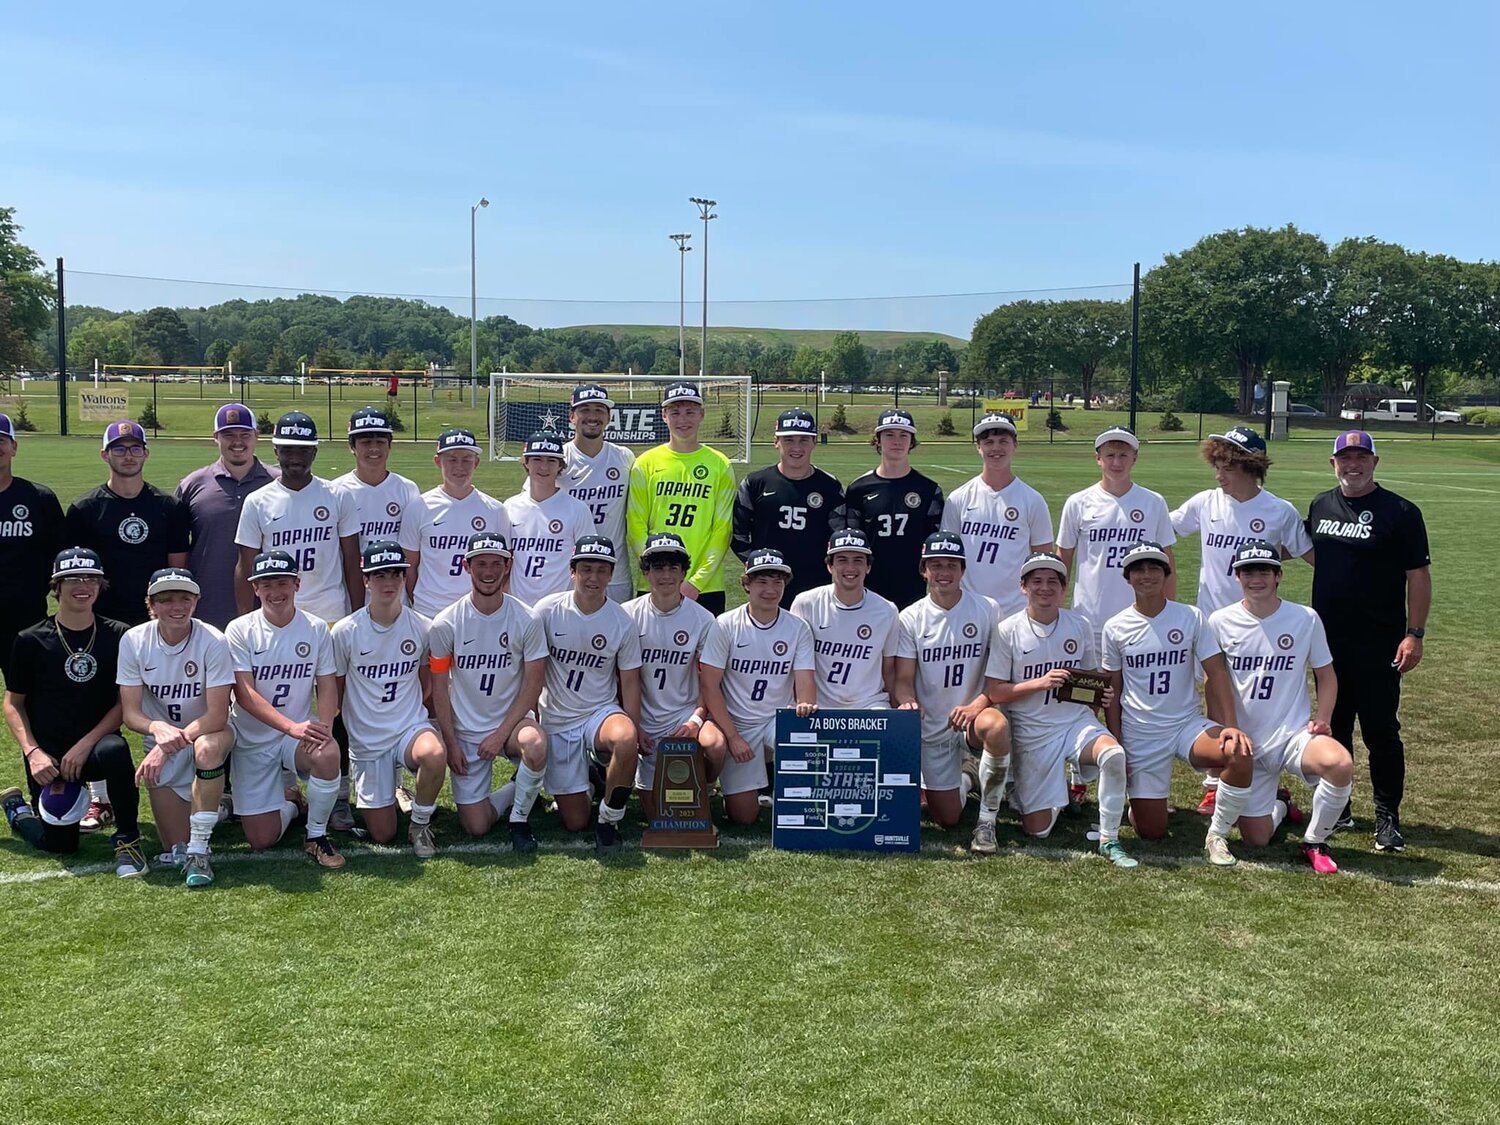 The Daphne Trojans pose with their second straight AHSAA Class 7A state championship after a 3-1 win over Huntsville Saturday, May 13, at John Hunt Park. University of Mobile signee Noah Miller, front row third from right, was named state tournament MVP with a pair of goals in the title match.